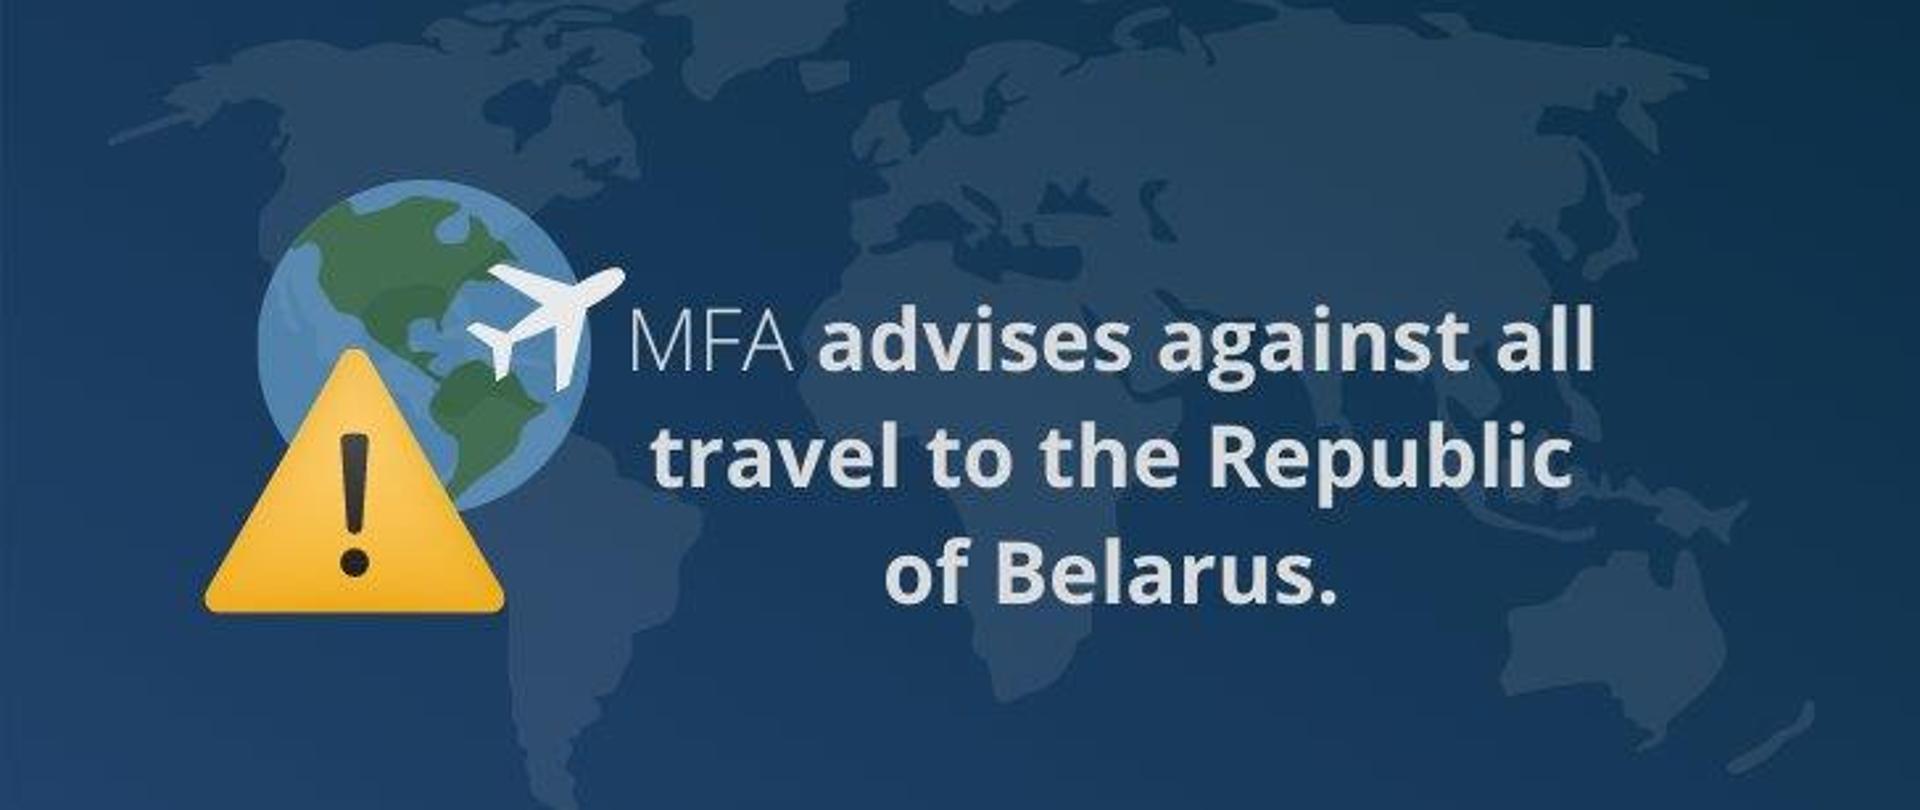 MFA advises against all travel to the Republic of Belarus